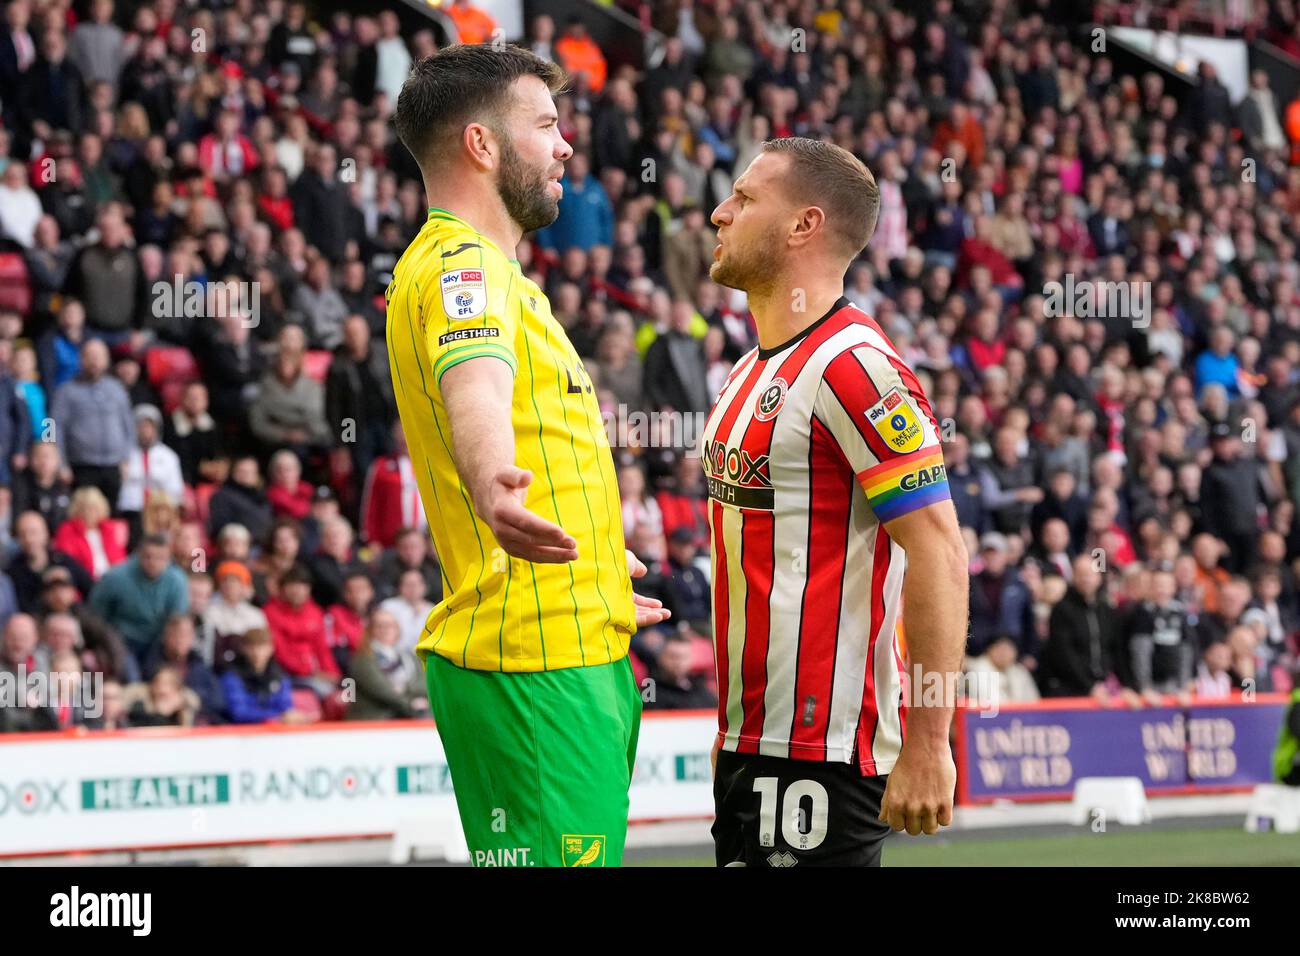 Grant Hanley #5 of Norwich City and Billy Sharp #10 of Sheffield United react during the Sky Bet Championship match Sheffield United vs Norwich City at Bramall Lane, Sheffield, United Kingdom, 22nd October 2022  (Photo by Steve Flynn/News Images) Stock Photo